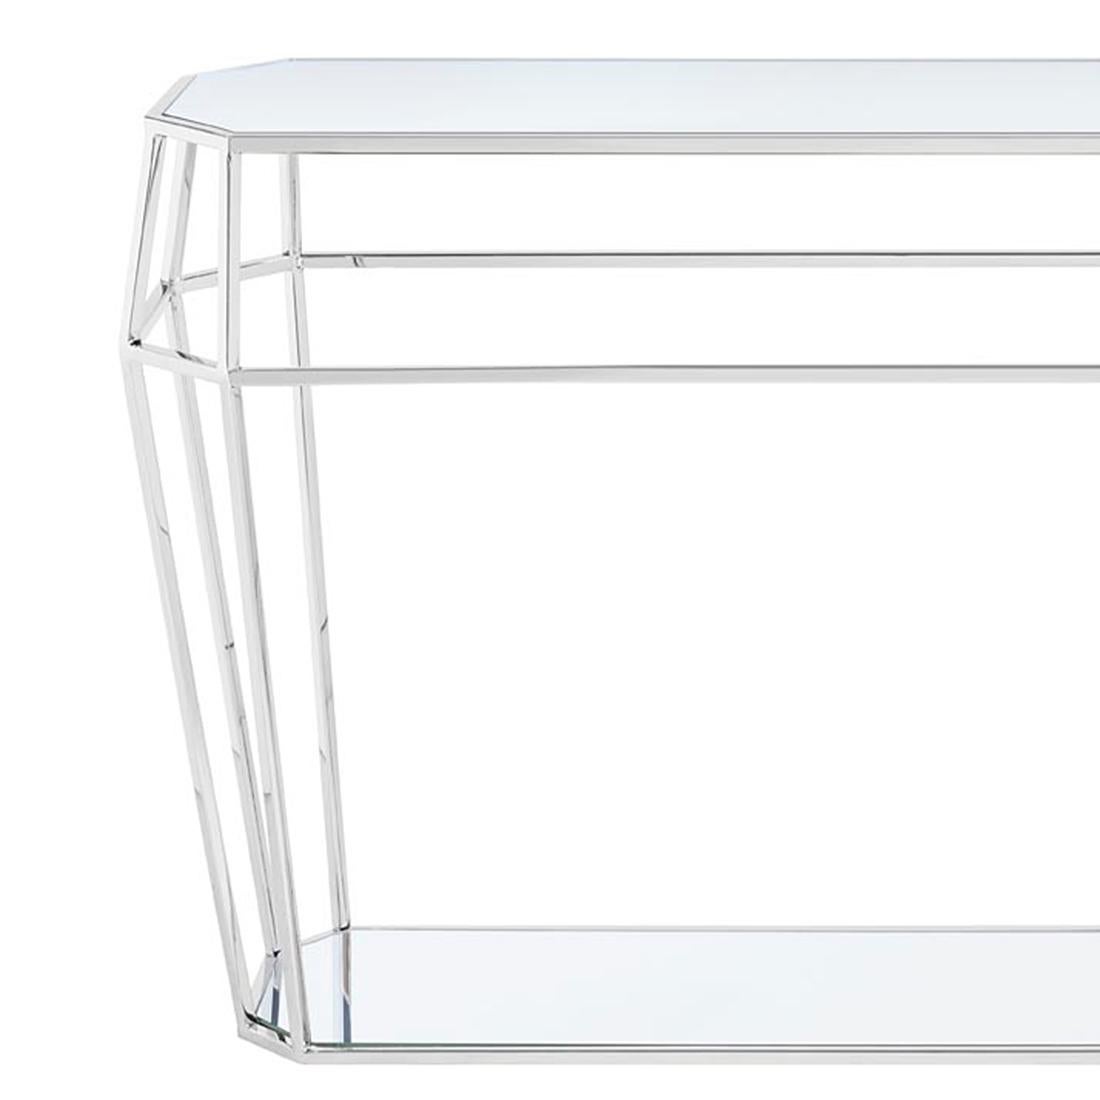 Console table Talisma glass with metal
structure in chrome finish, with glass tops.